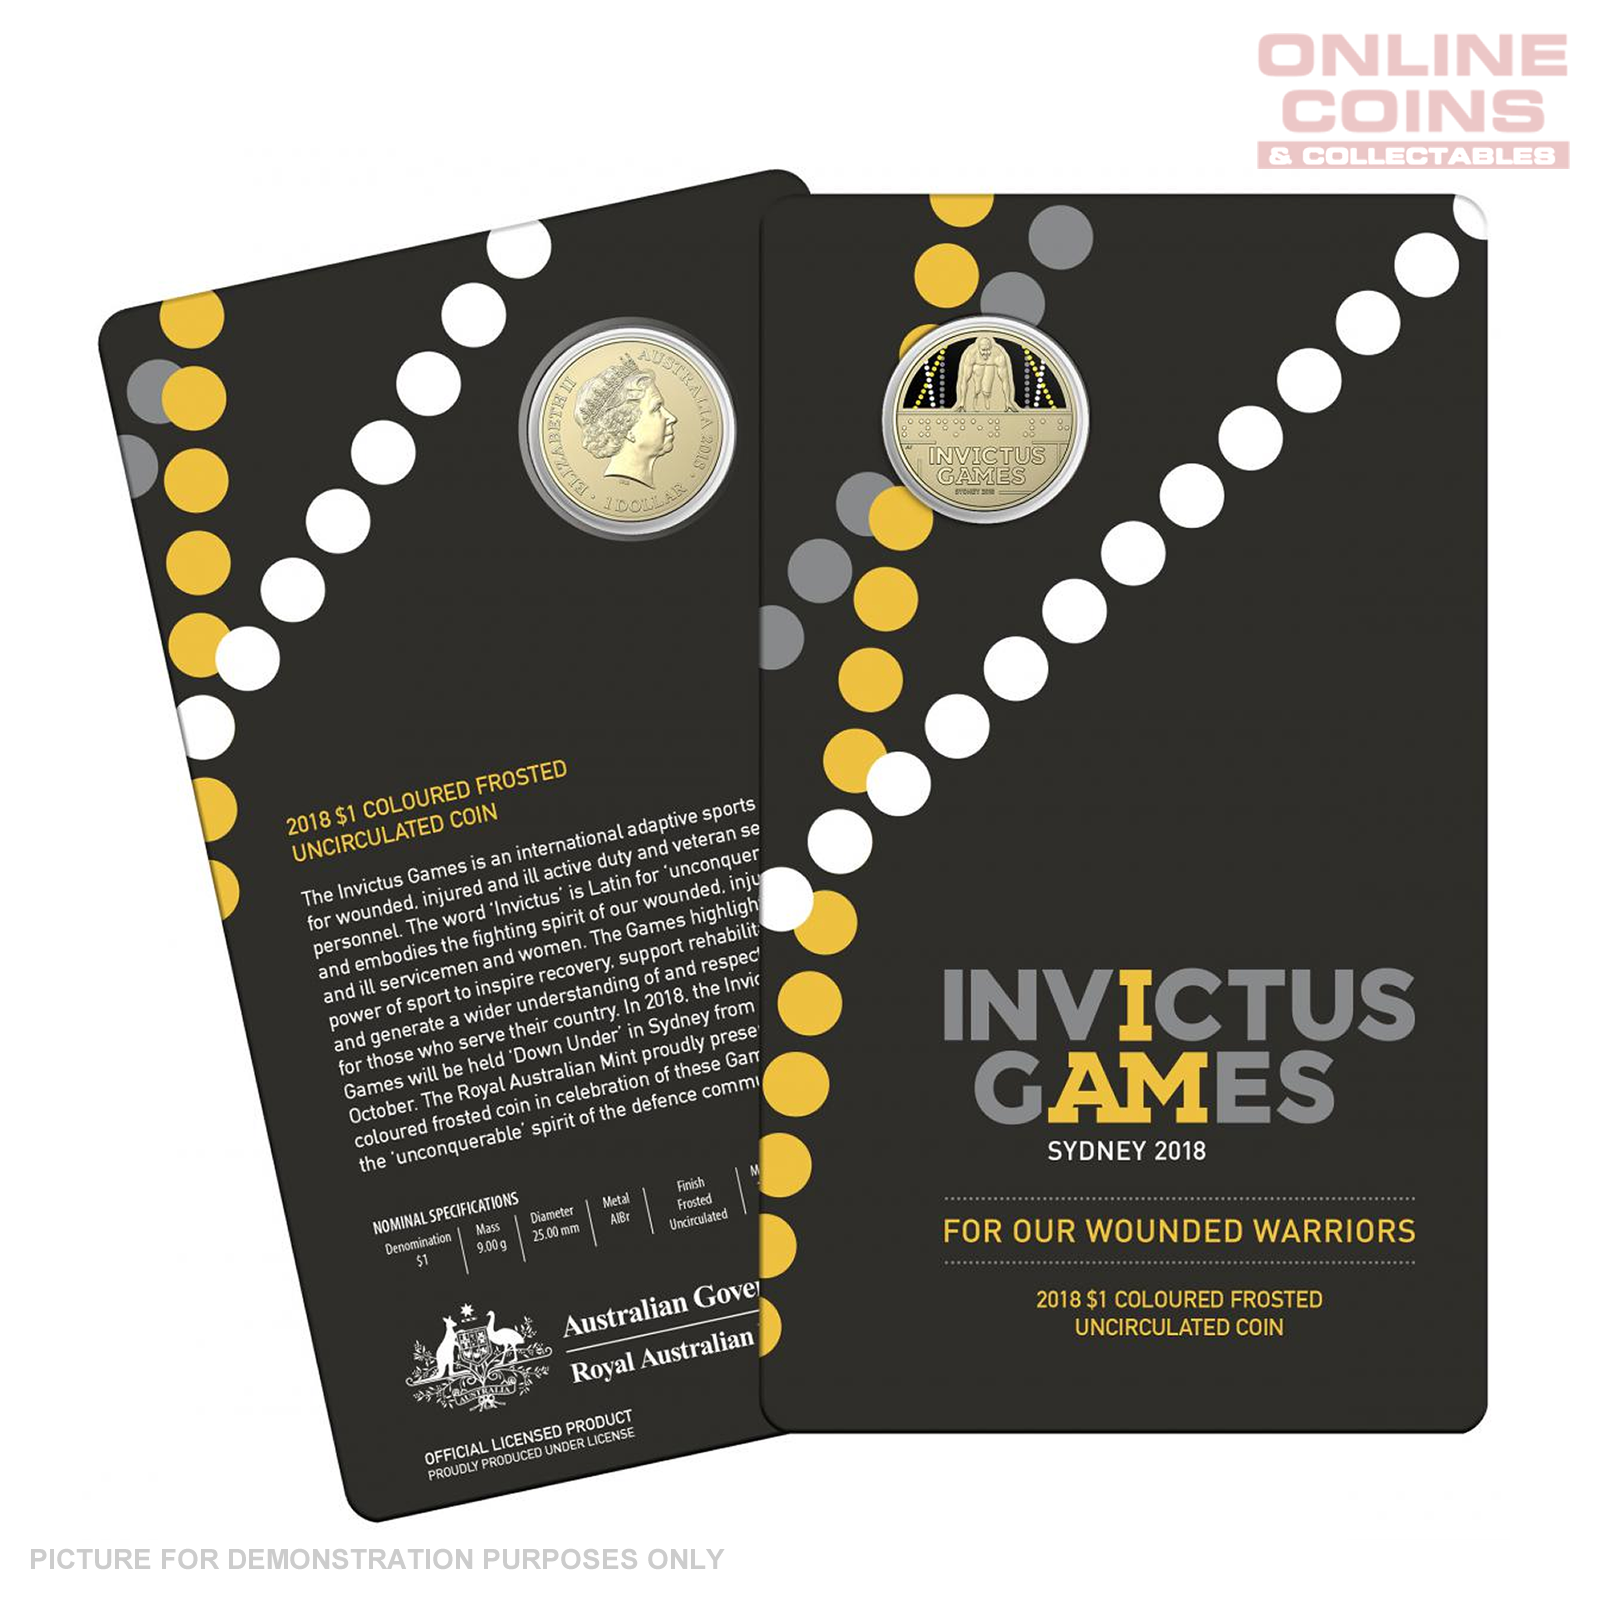 2018 Invictus Games $1 Coloured Frosted Uncirculated Carded Coin